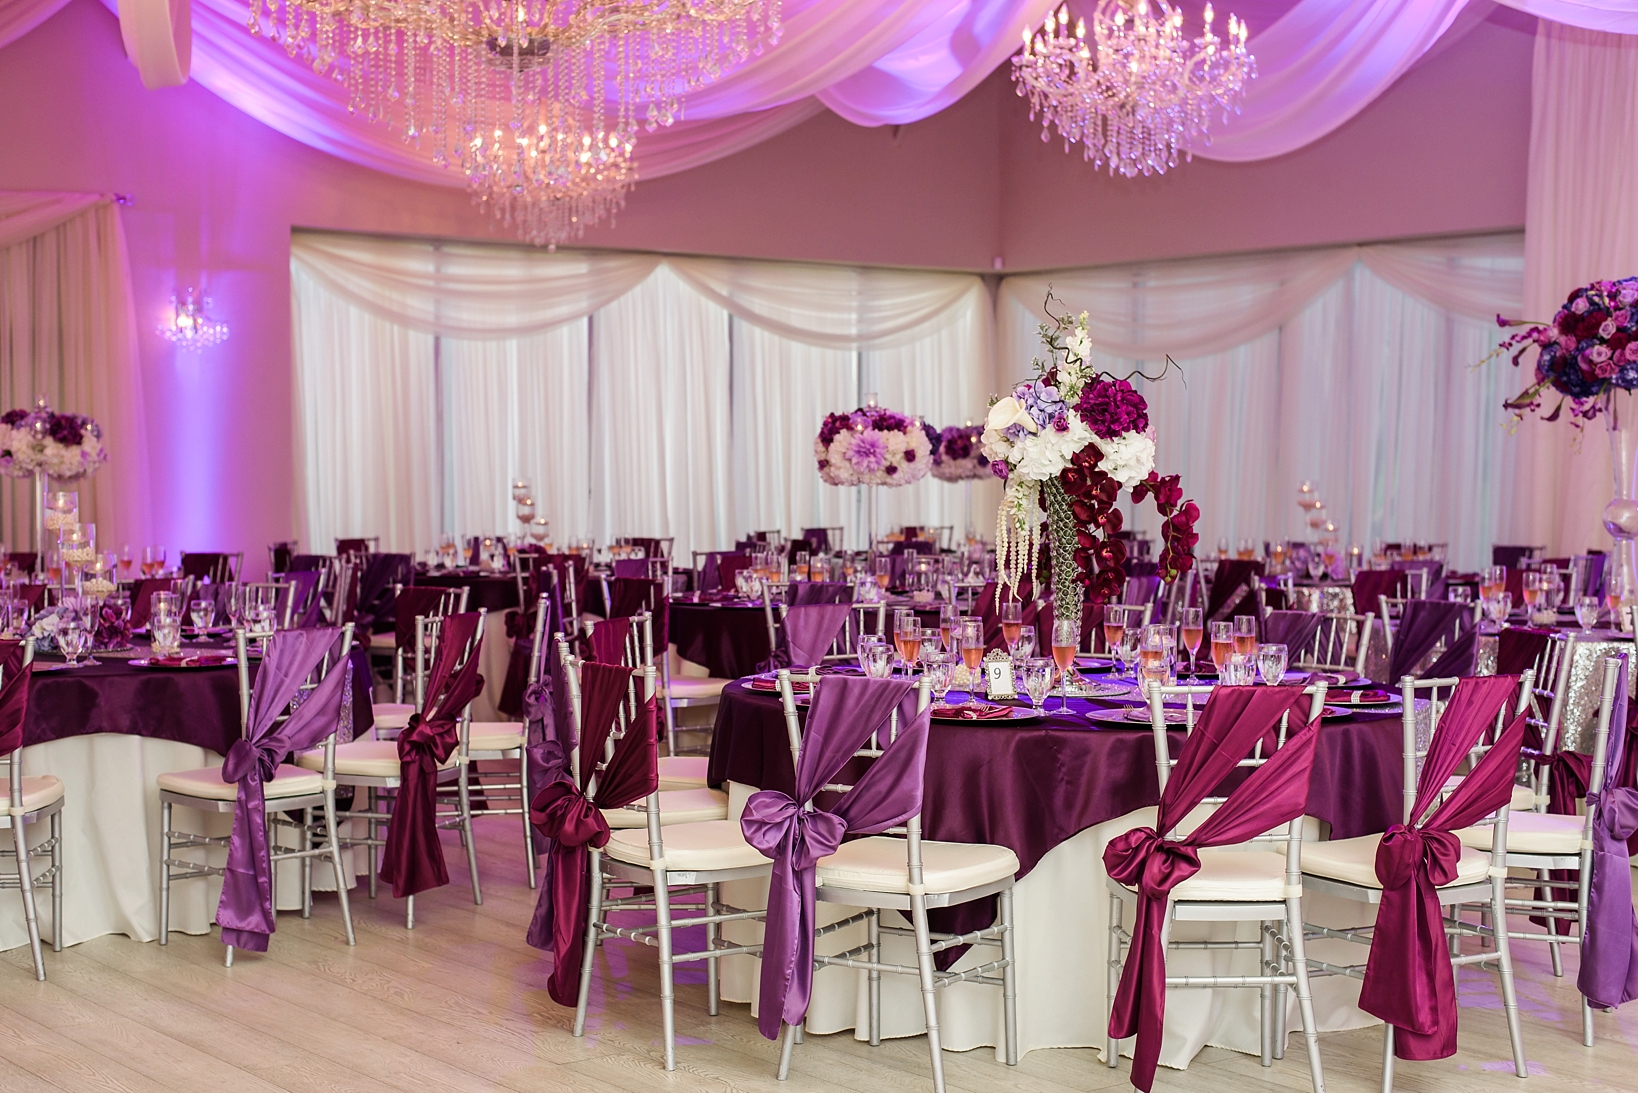 The reception space decked out in purples and pink hues